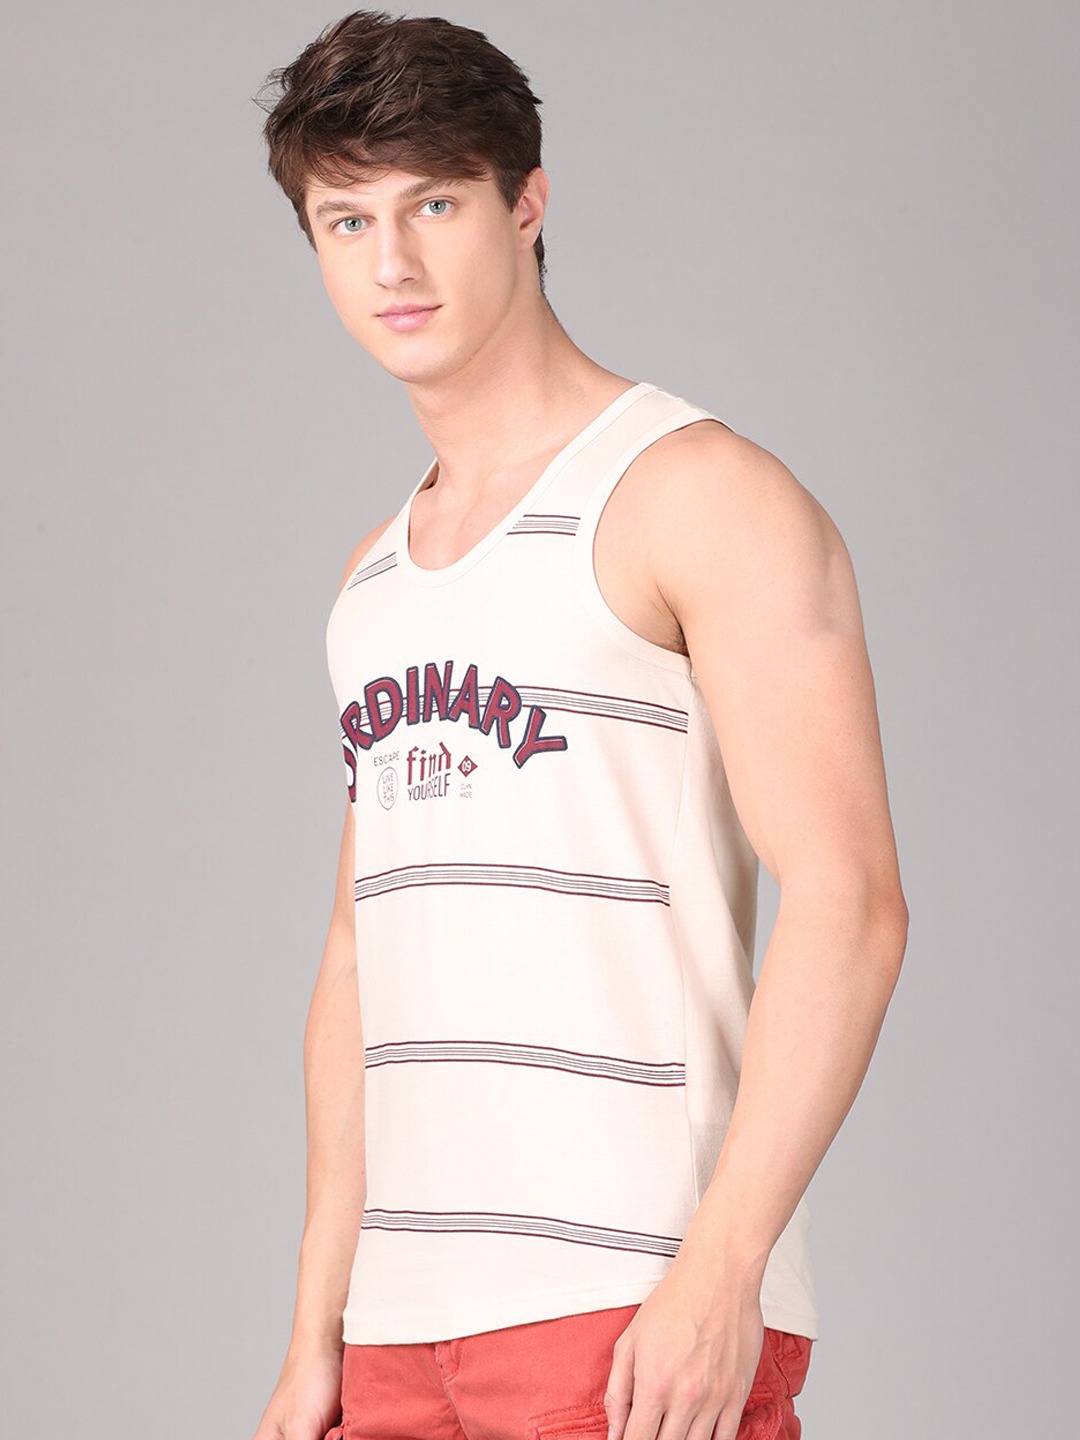 Clothing Innerwear Vests | IMYOUNG Men Off-White Typography Printed Innerwear Vests - ZQ57371